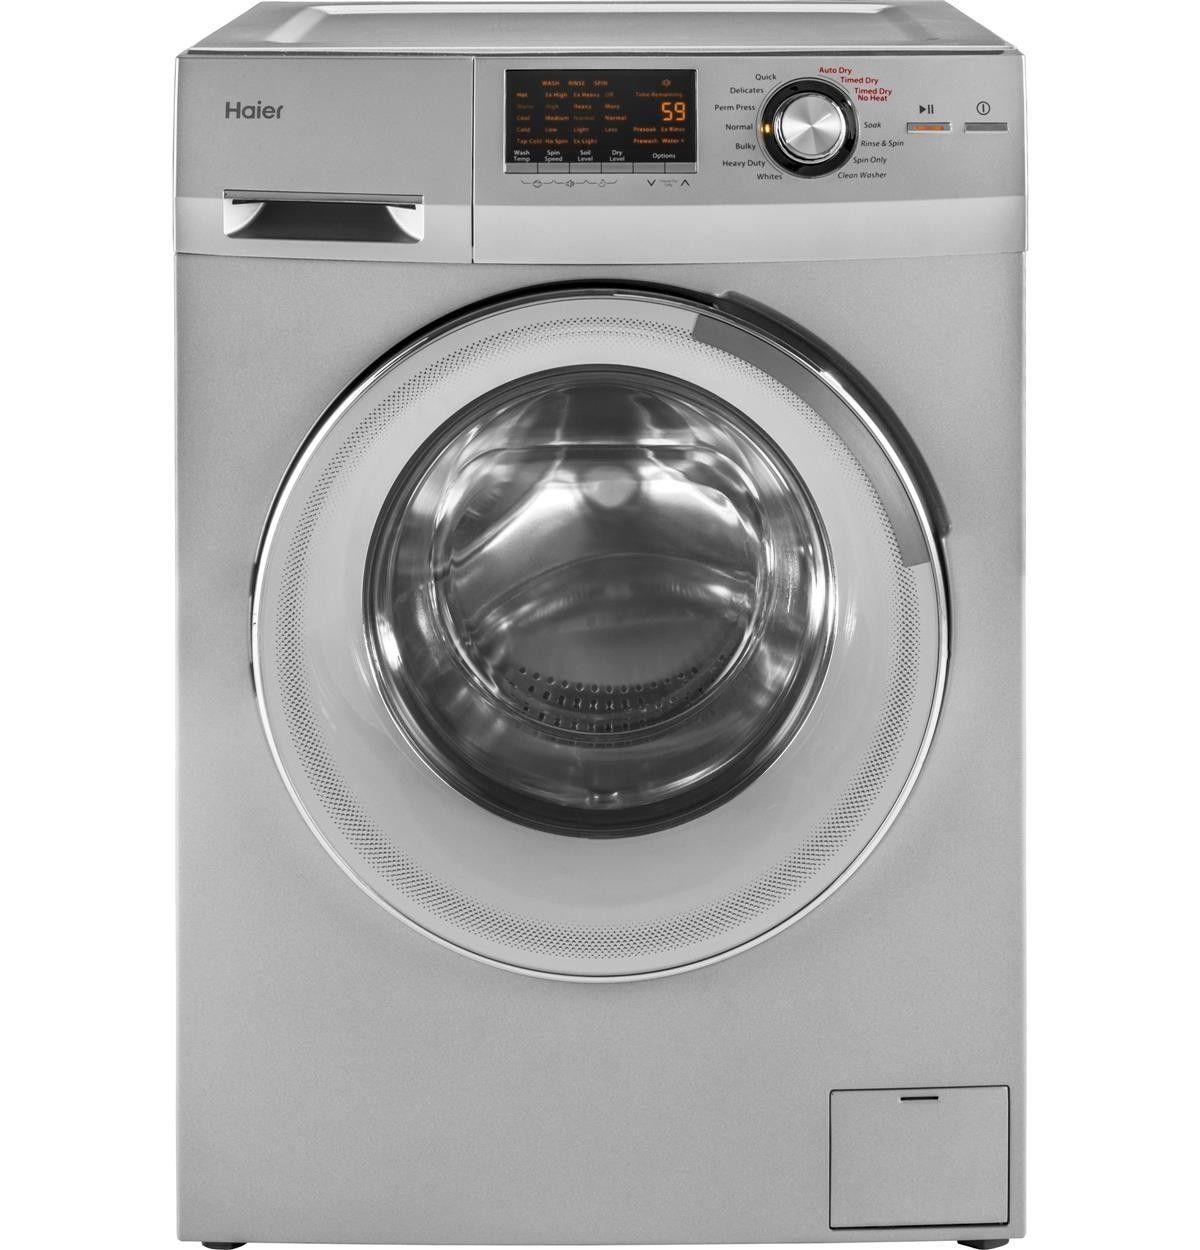 FREE!!!! HAVE TO PICKUP!!! 24" 2.0 cu. ft. Front Load Washer/Dryer Combo Haier USED MOVE OUT SALE